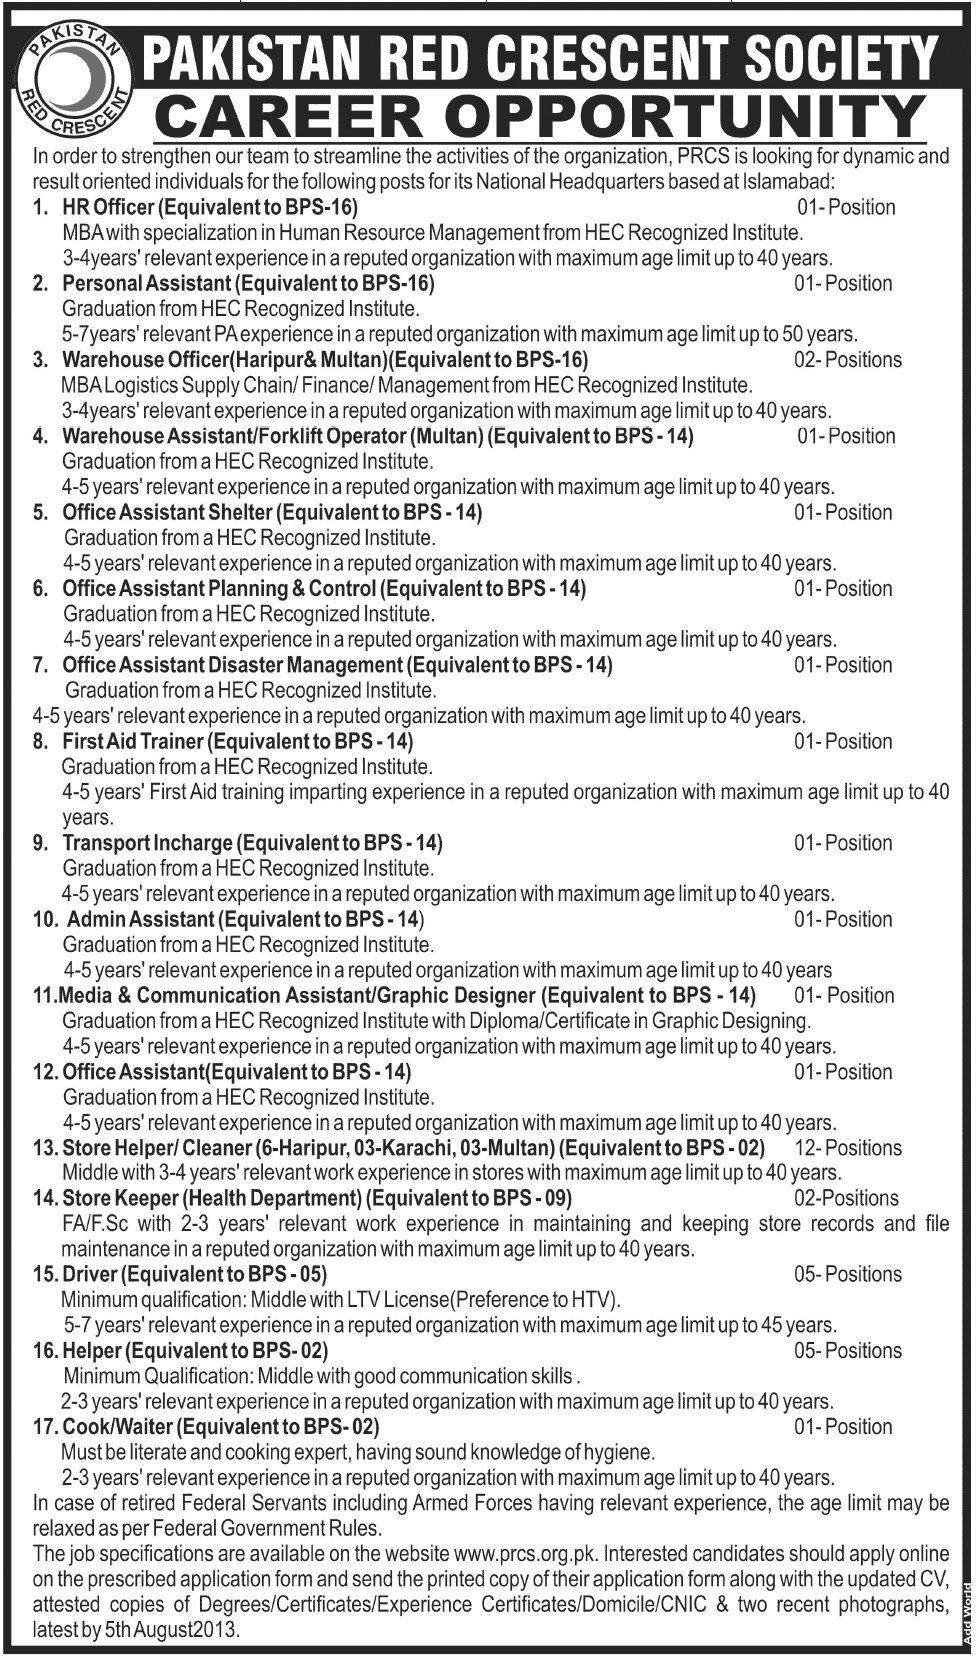 Pakistan Red Crescent Society Jobs for HR Officer & Personal Assistant